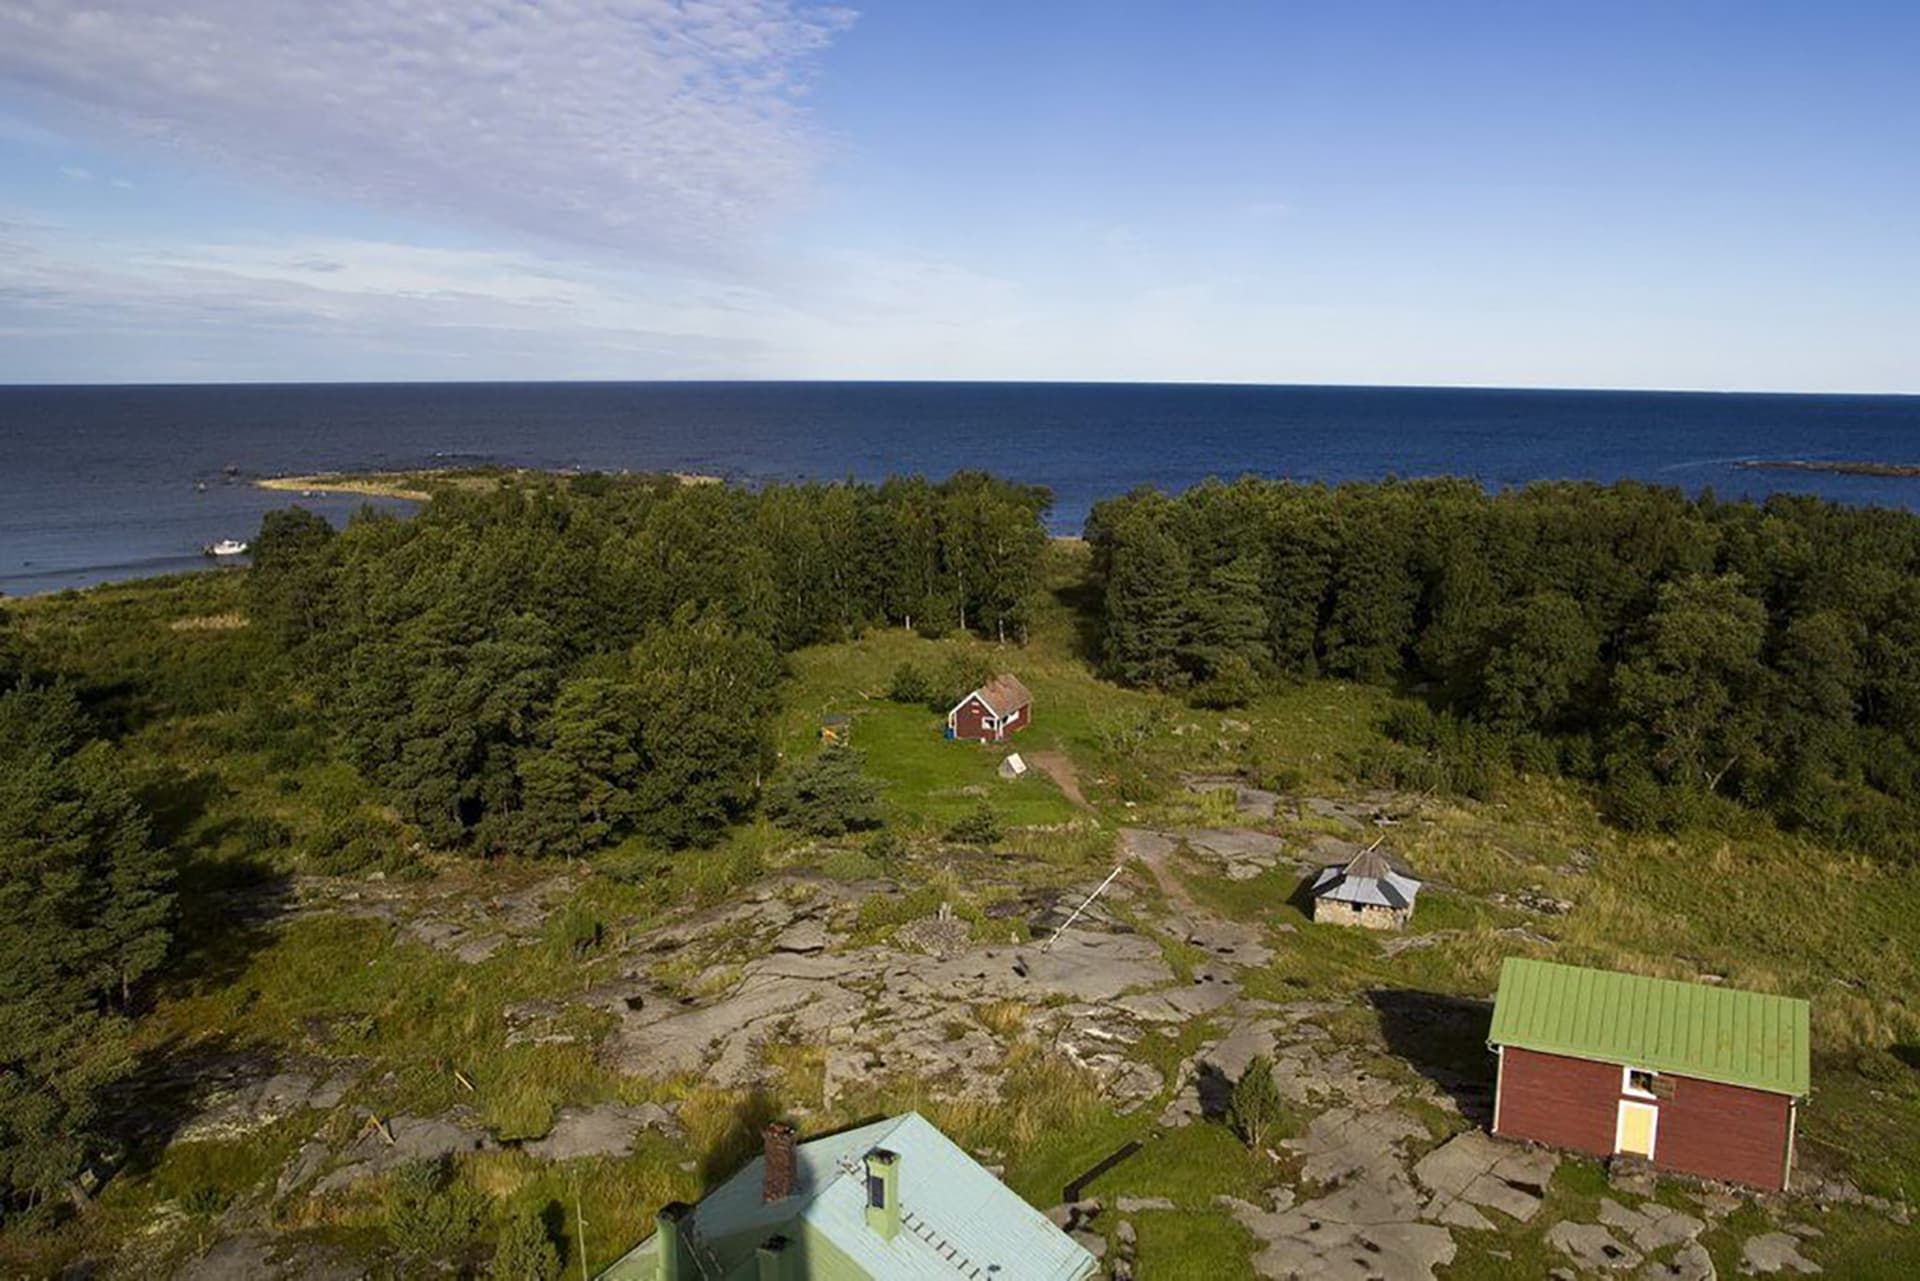 View from the Säppi lighthouse